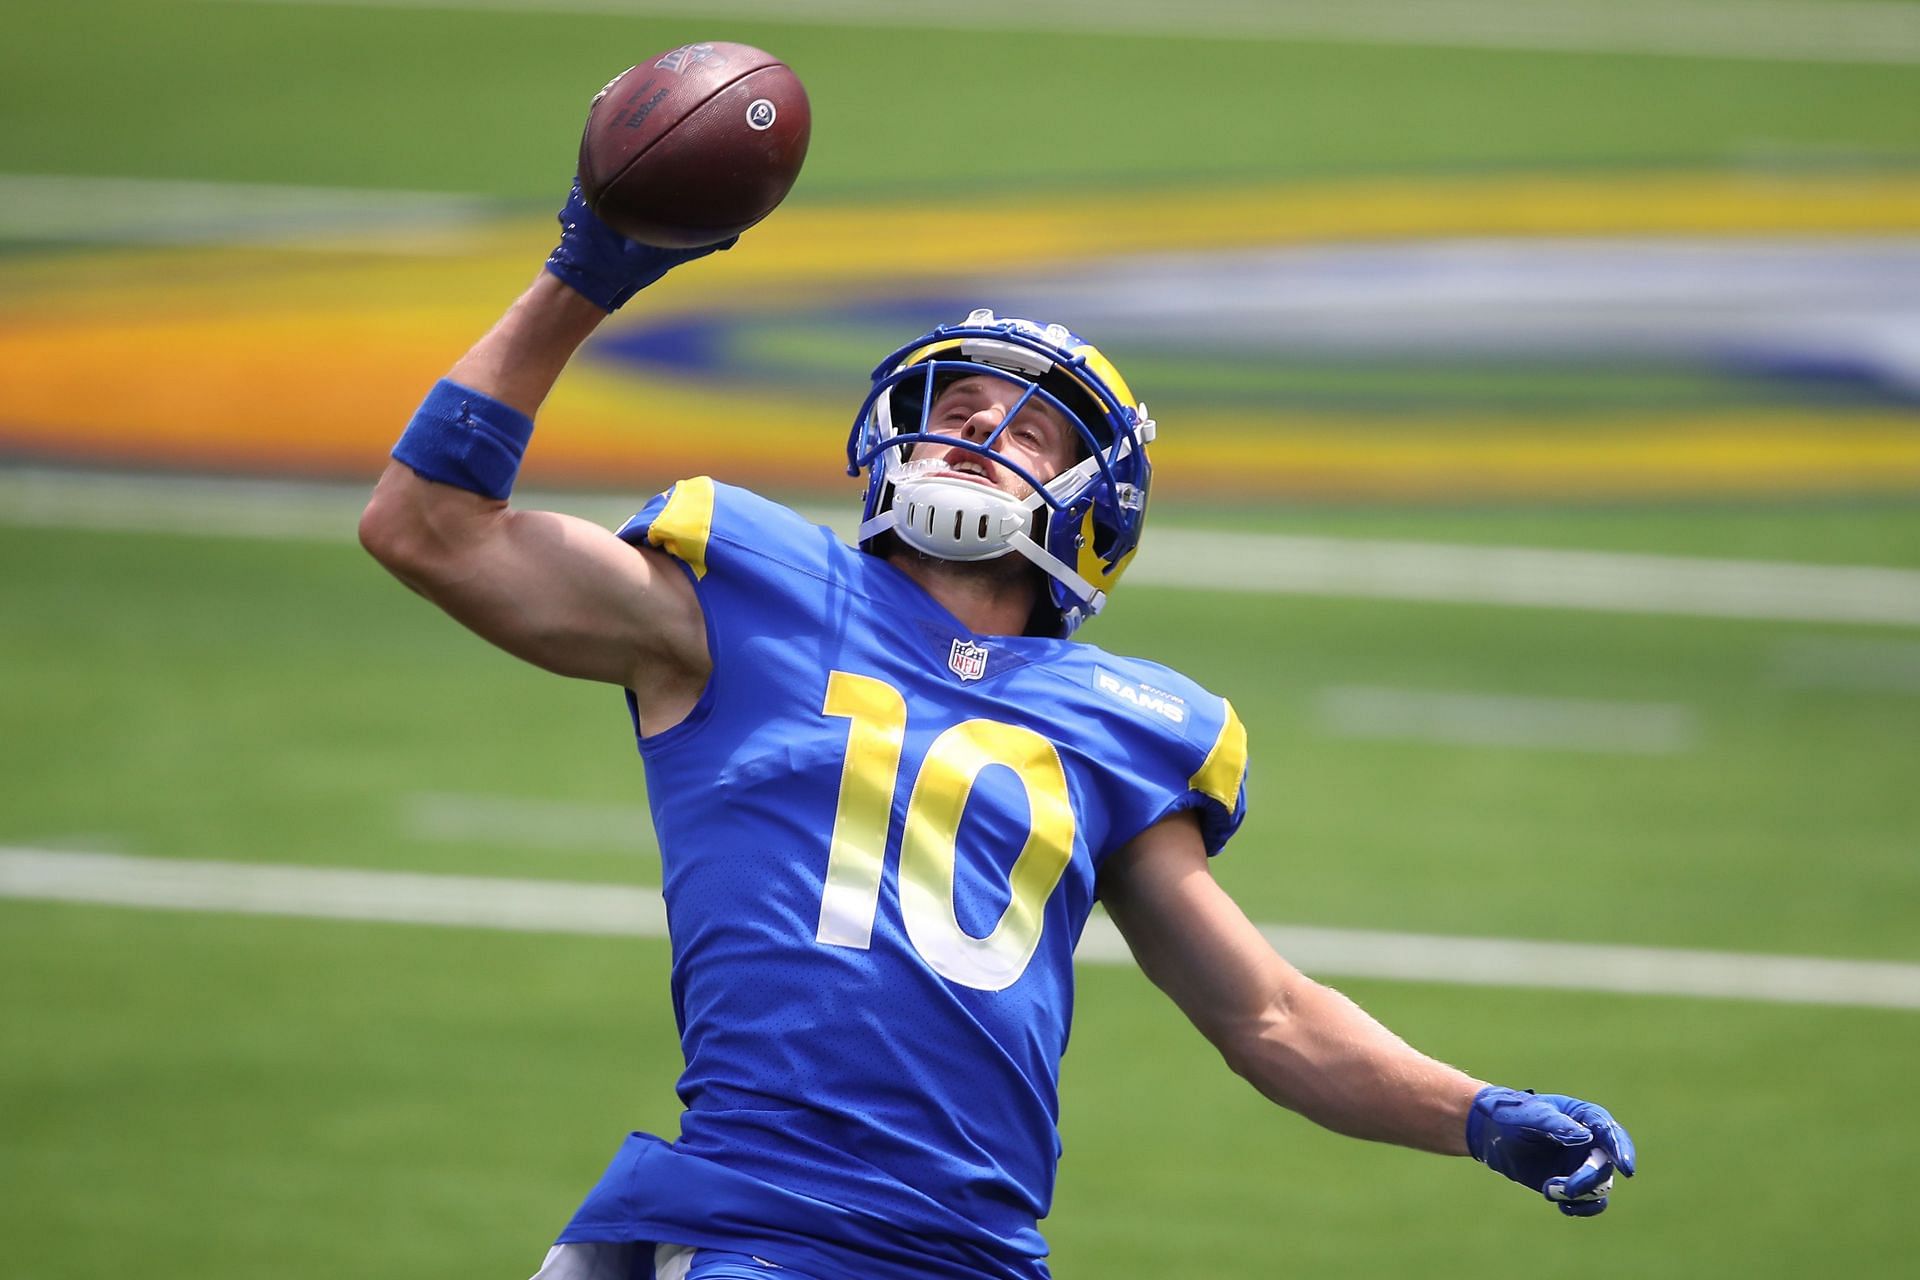 Does Cooper Kupp deserve to be in the conversation for 2021 NFL MVP award?